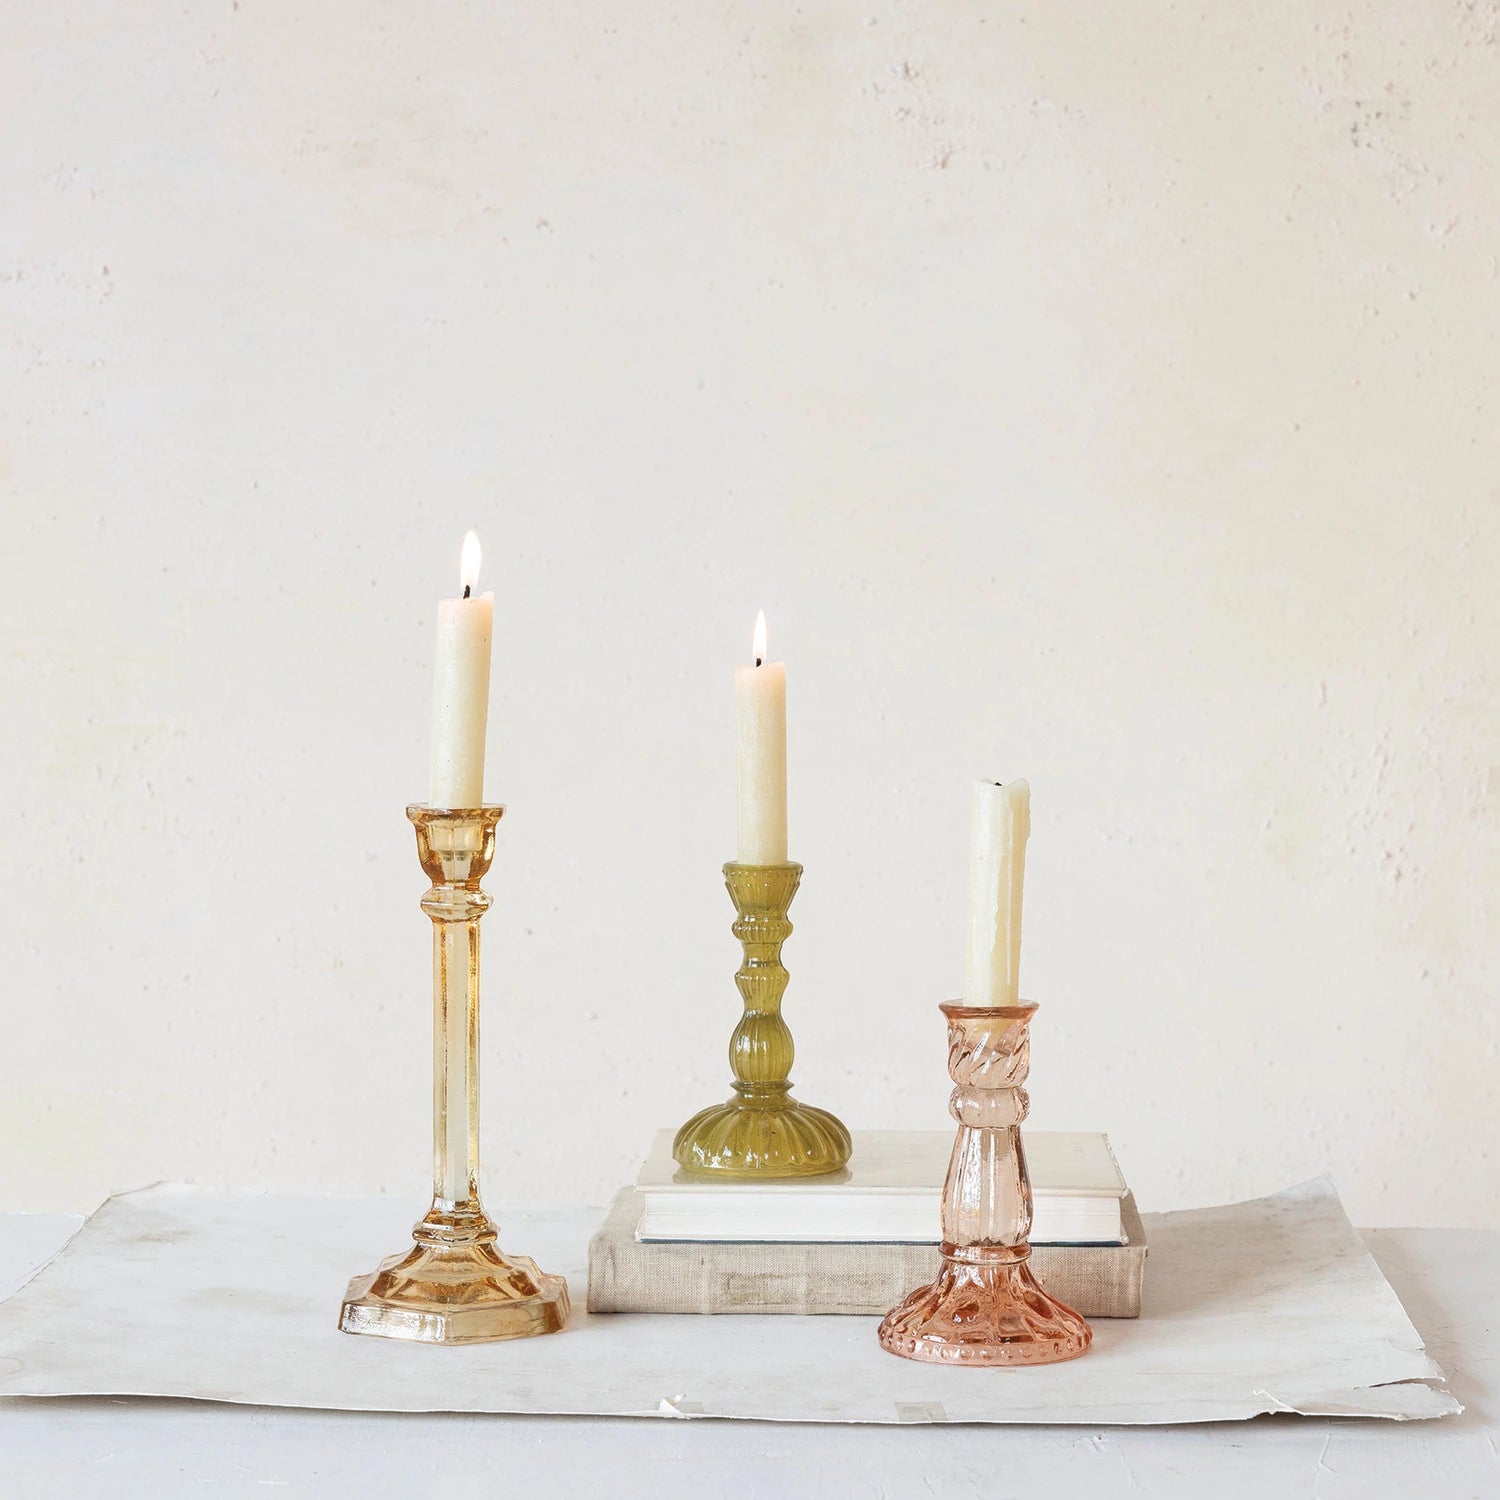 3 styles of glass candle holders with off-white tapers in them arranged on a counter with books.